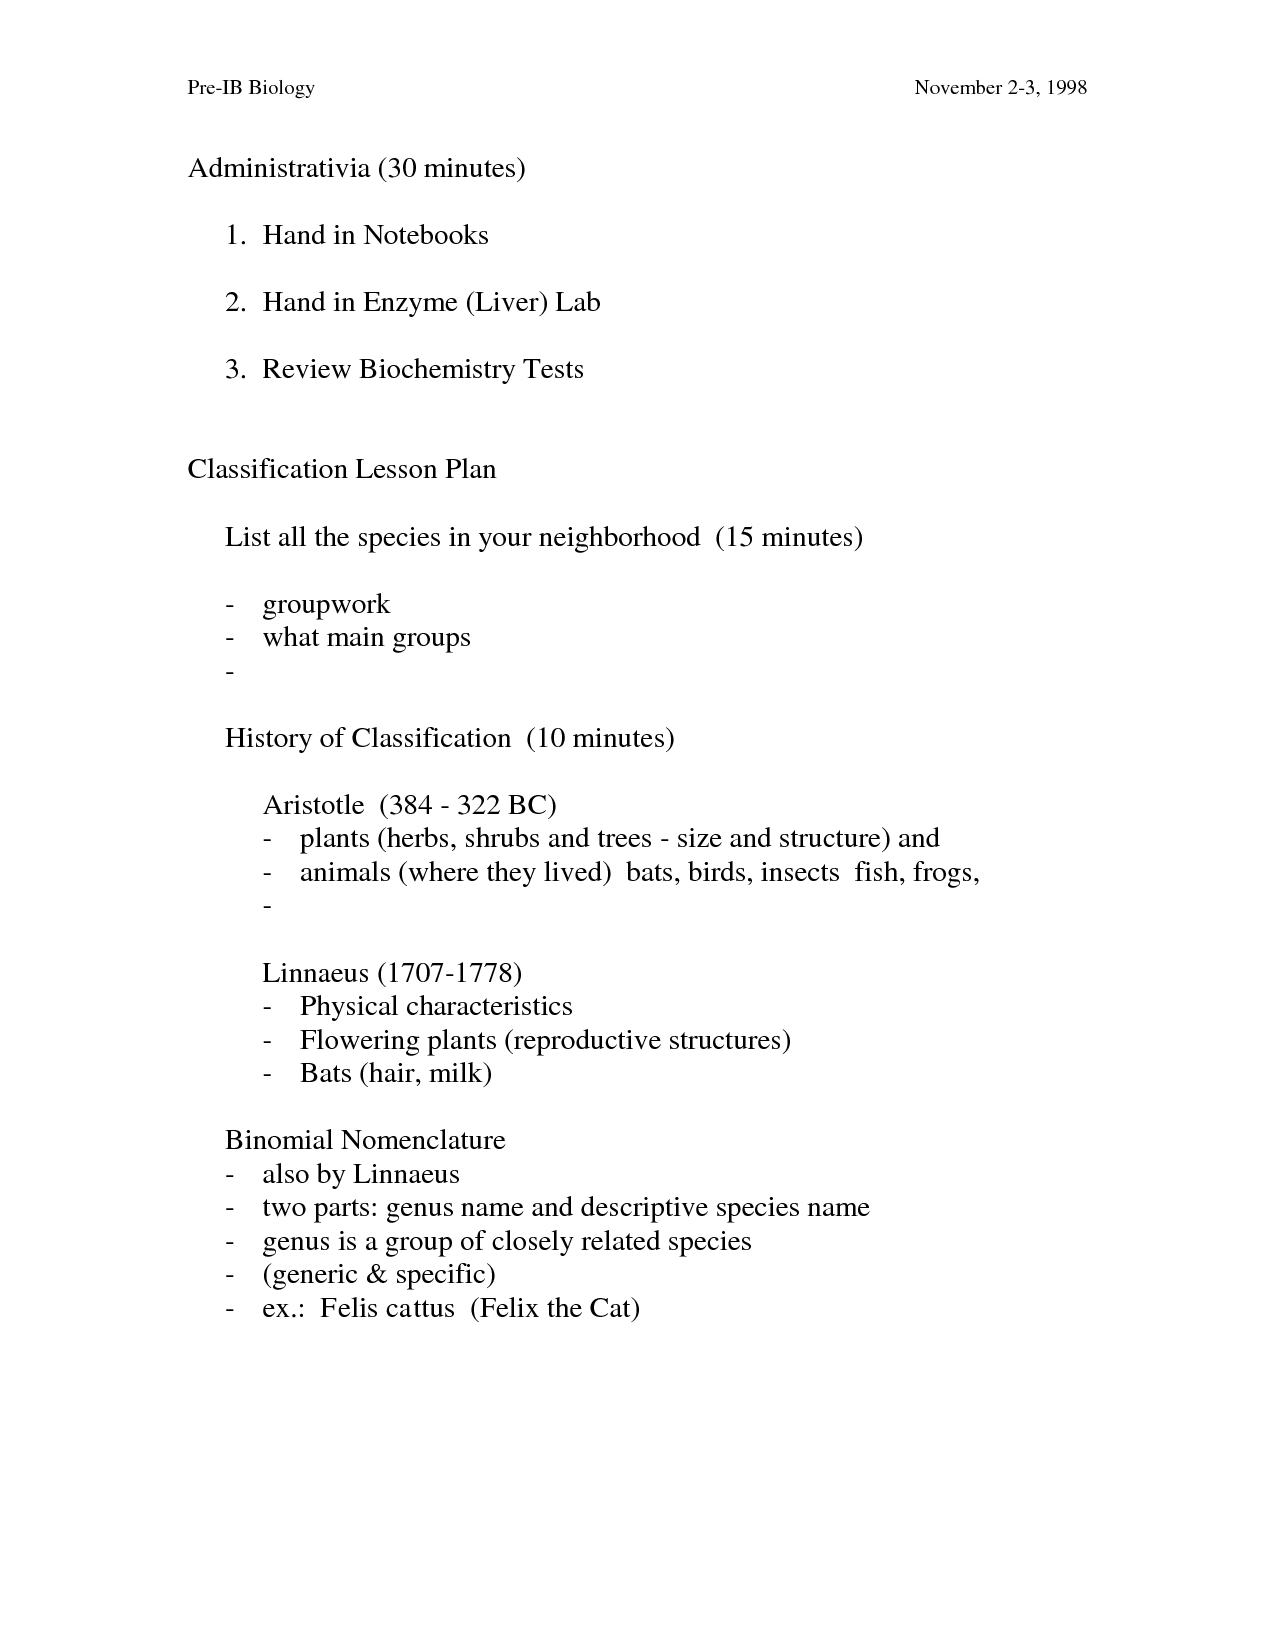 Classification Worksheet and Answer Key